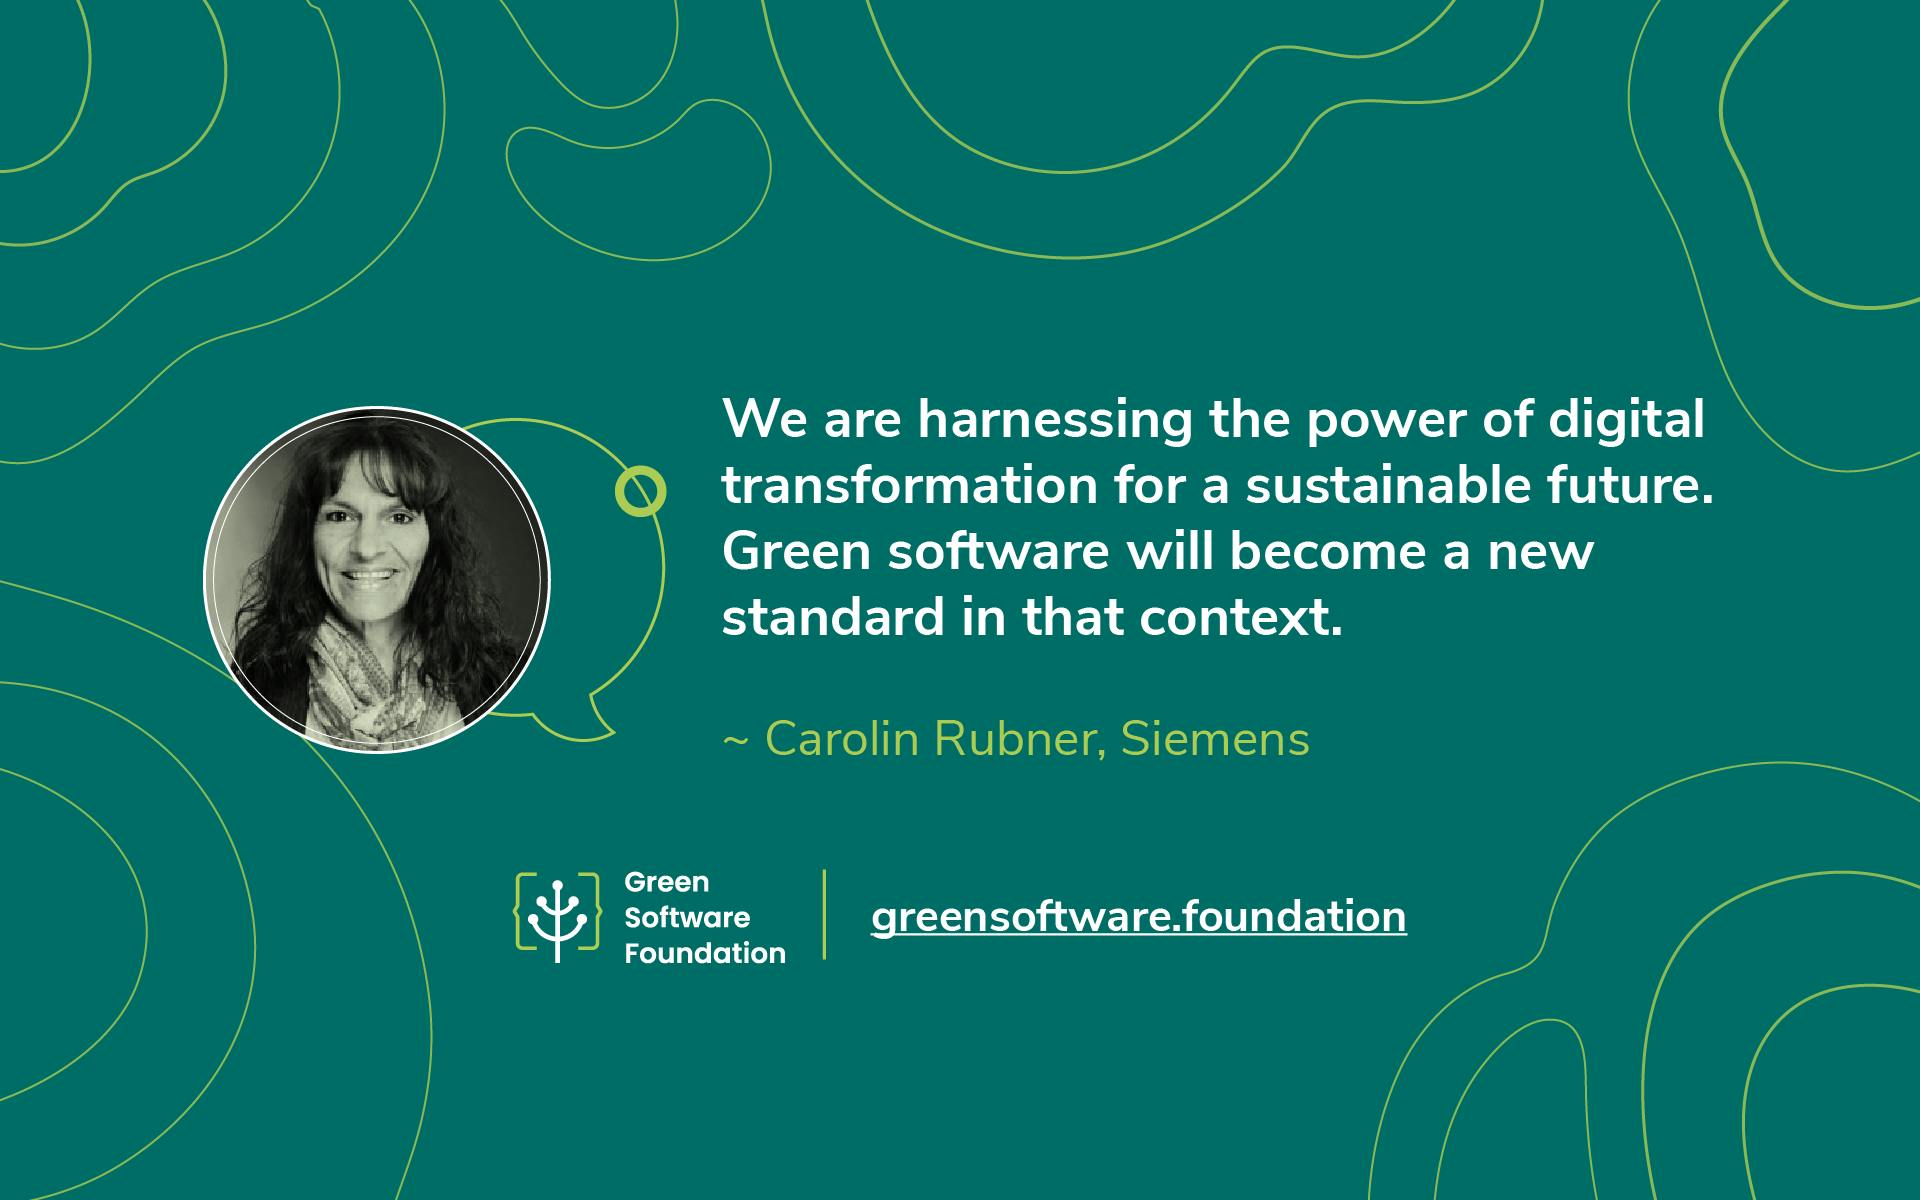 Creating Technology with Purpose - Meet Carolin Rubner, Head of Research Group at Siemens